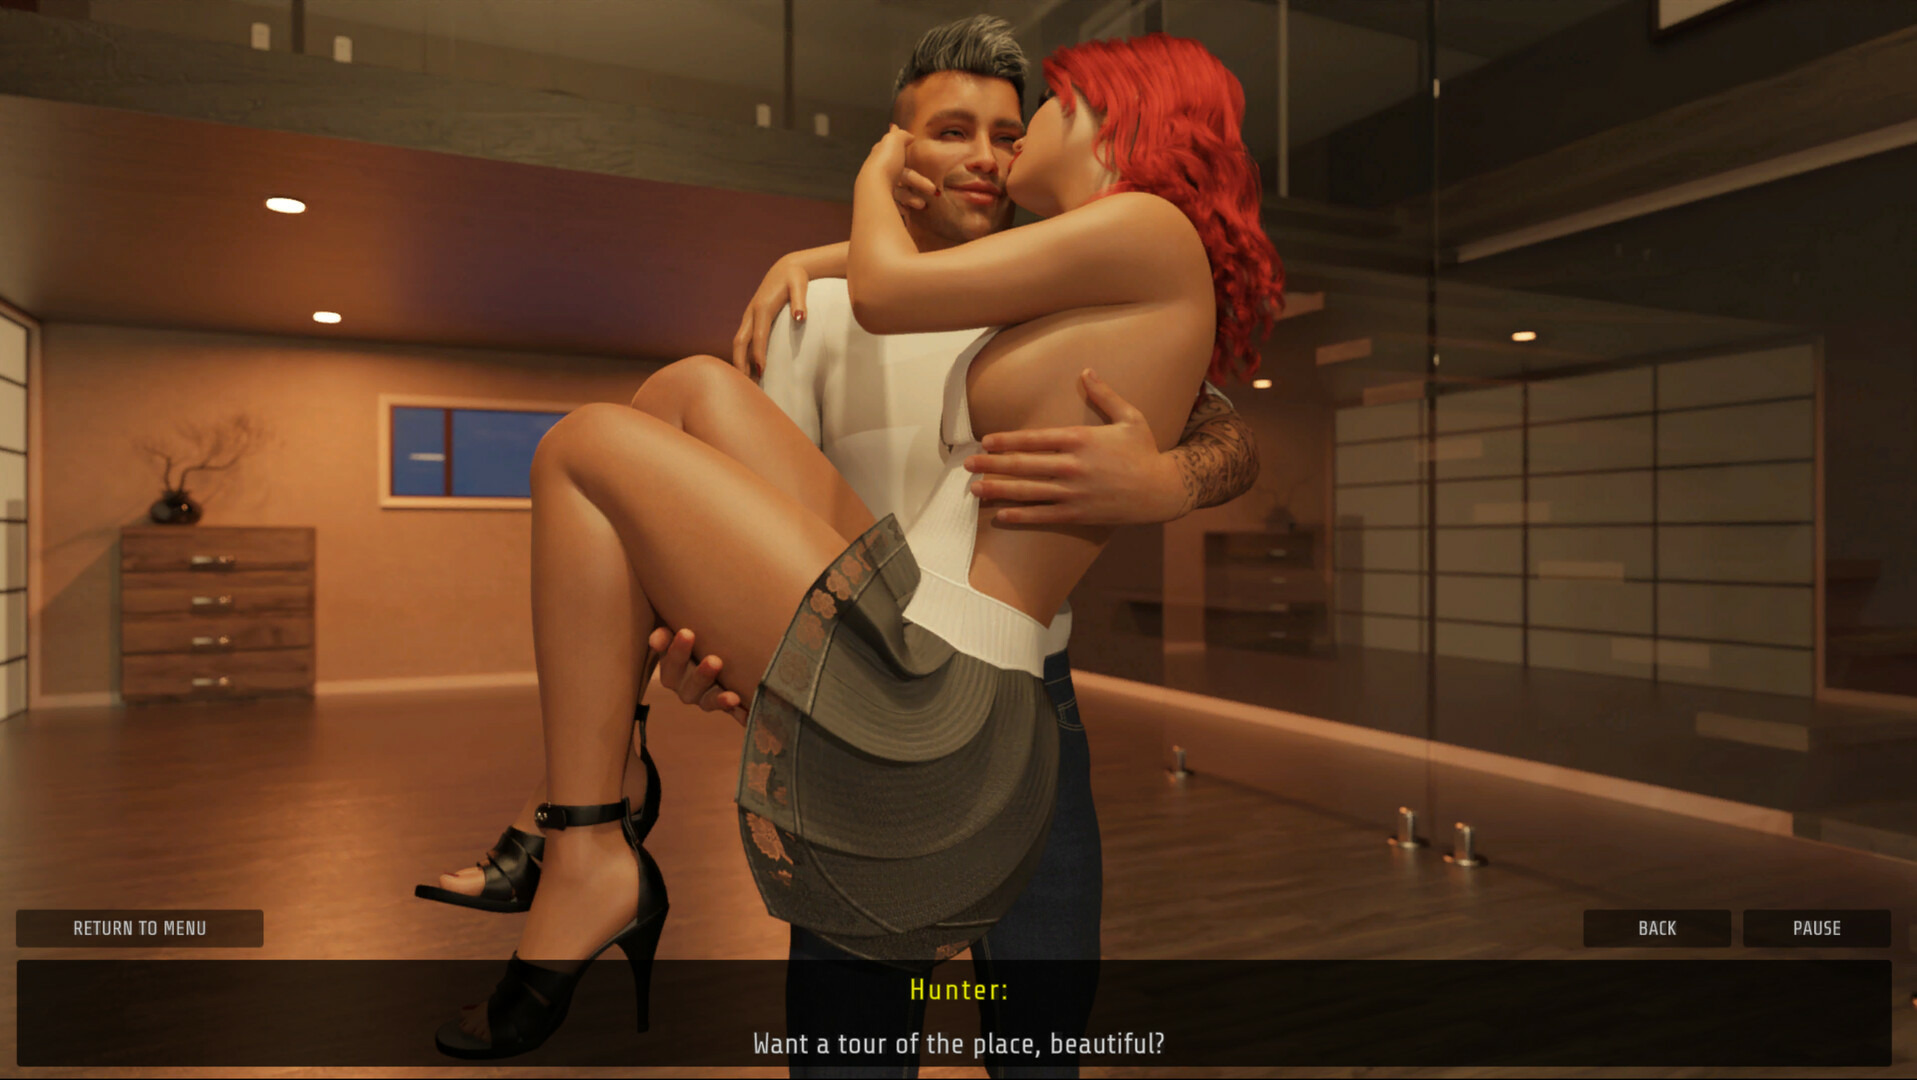 Sex Story - Ruby and Hunter - Episode 2 Steam CD Key, 1.92$